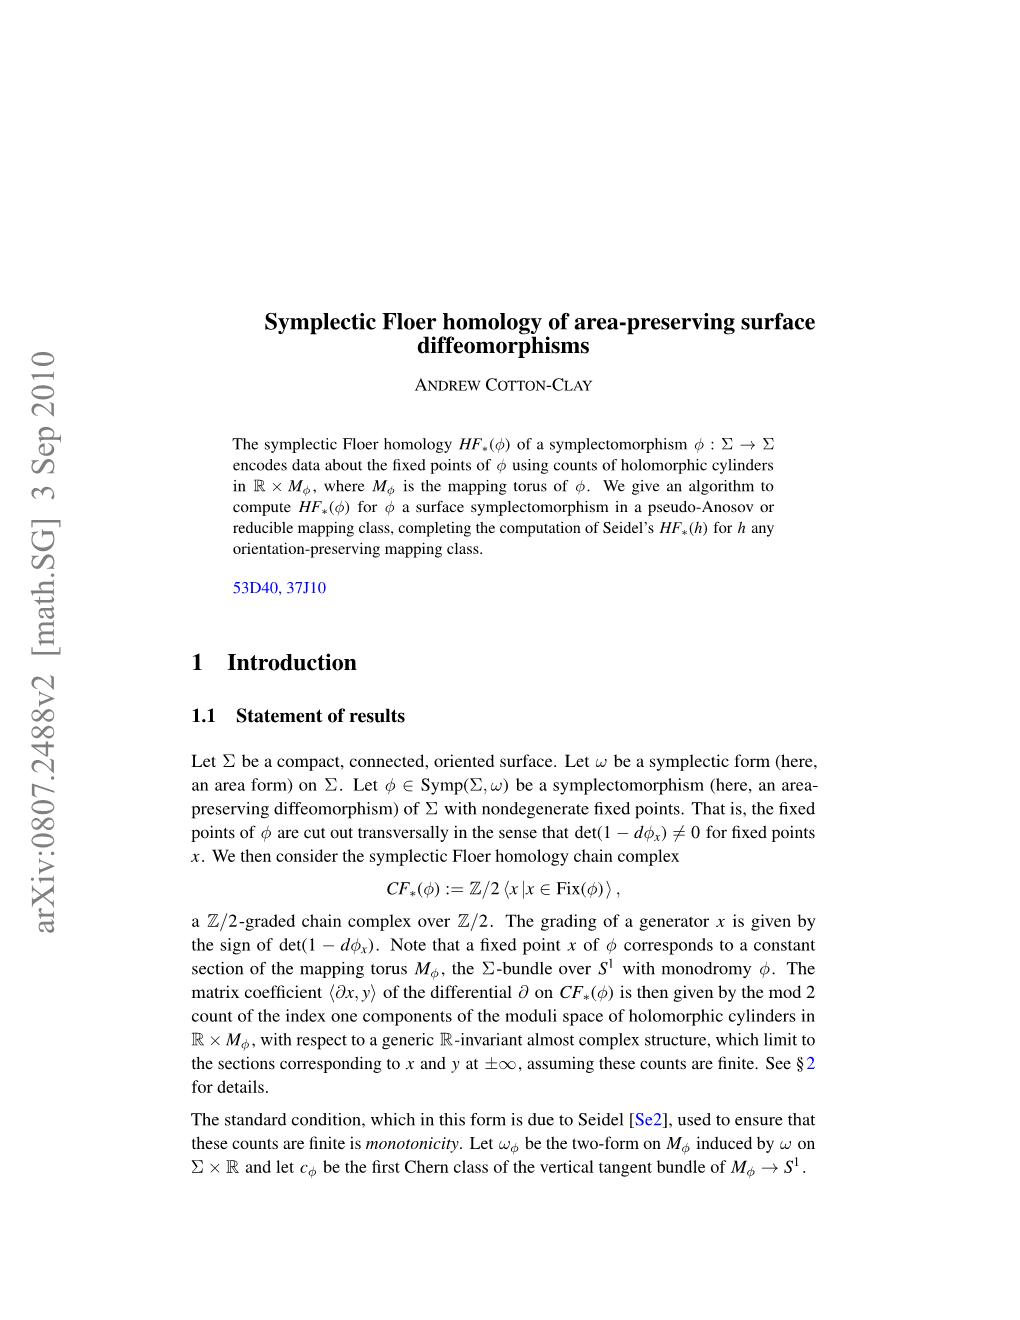 Symplectic Floer Homology of Area-Preserving Surface Diffeomorphisms